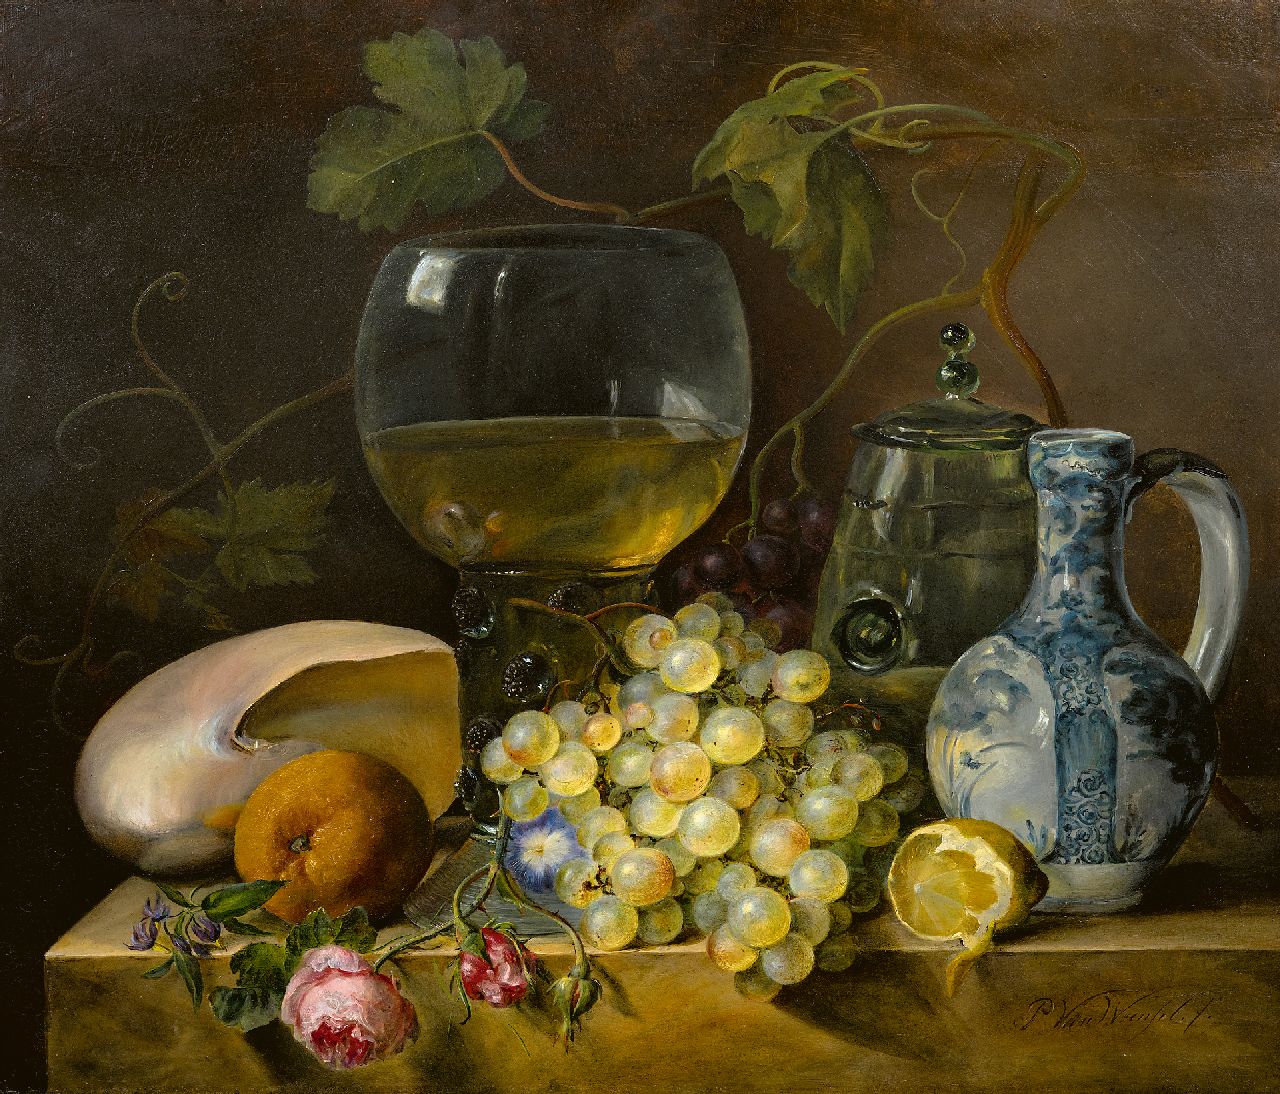 Woensel P. van | Petronella van Woensel, A still life of a rummer, exotic shell and grapes, oil on panel 50.8 x 58.9 cm, signed l.r.